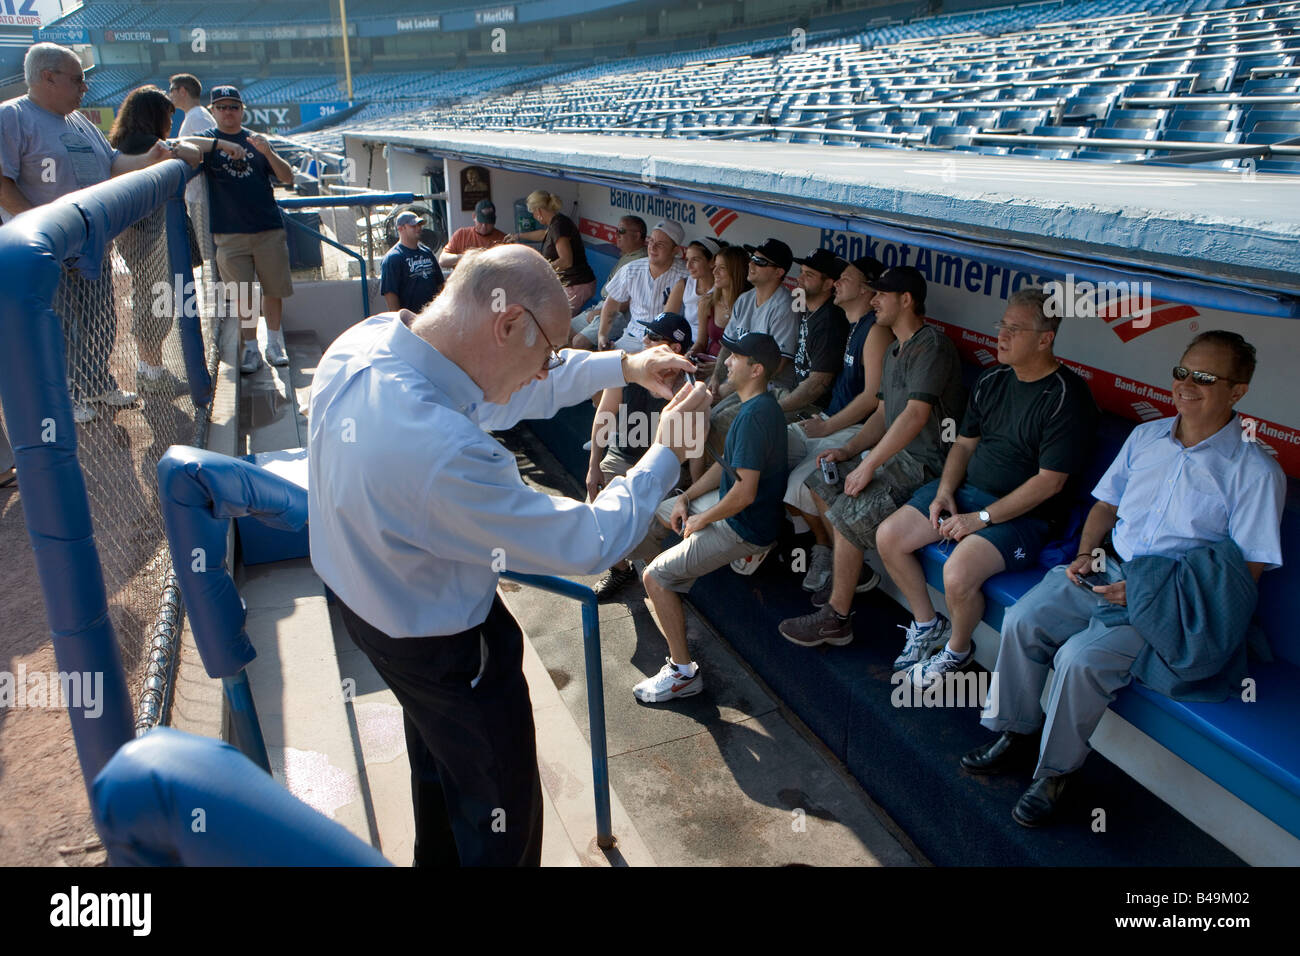 Fans on the Yankee stadium tour sit in the dugout and take snapshots of one another Stock Photo